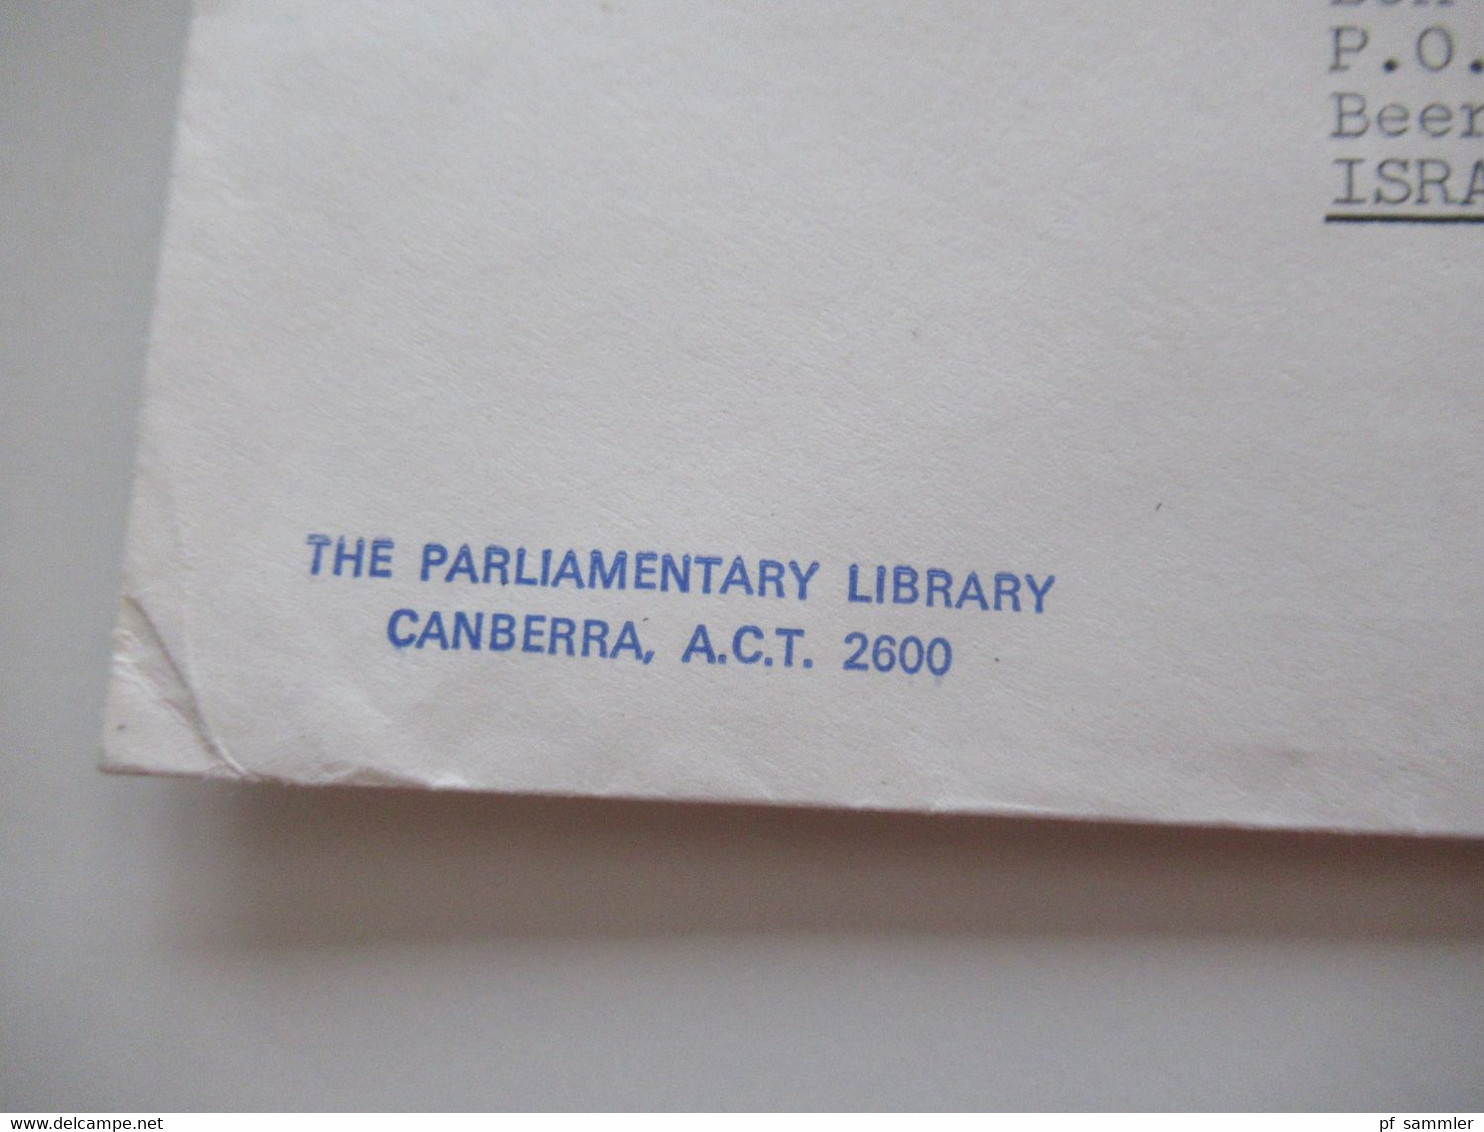 1976 Air Mail Nach Israel Freistempel Canberra Parliament House IW 9 Postage Paid Umschlag The Parliament Library - Lettres & Documents